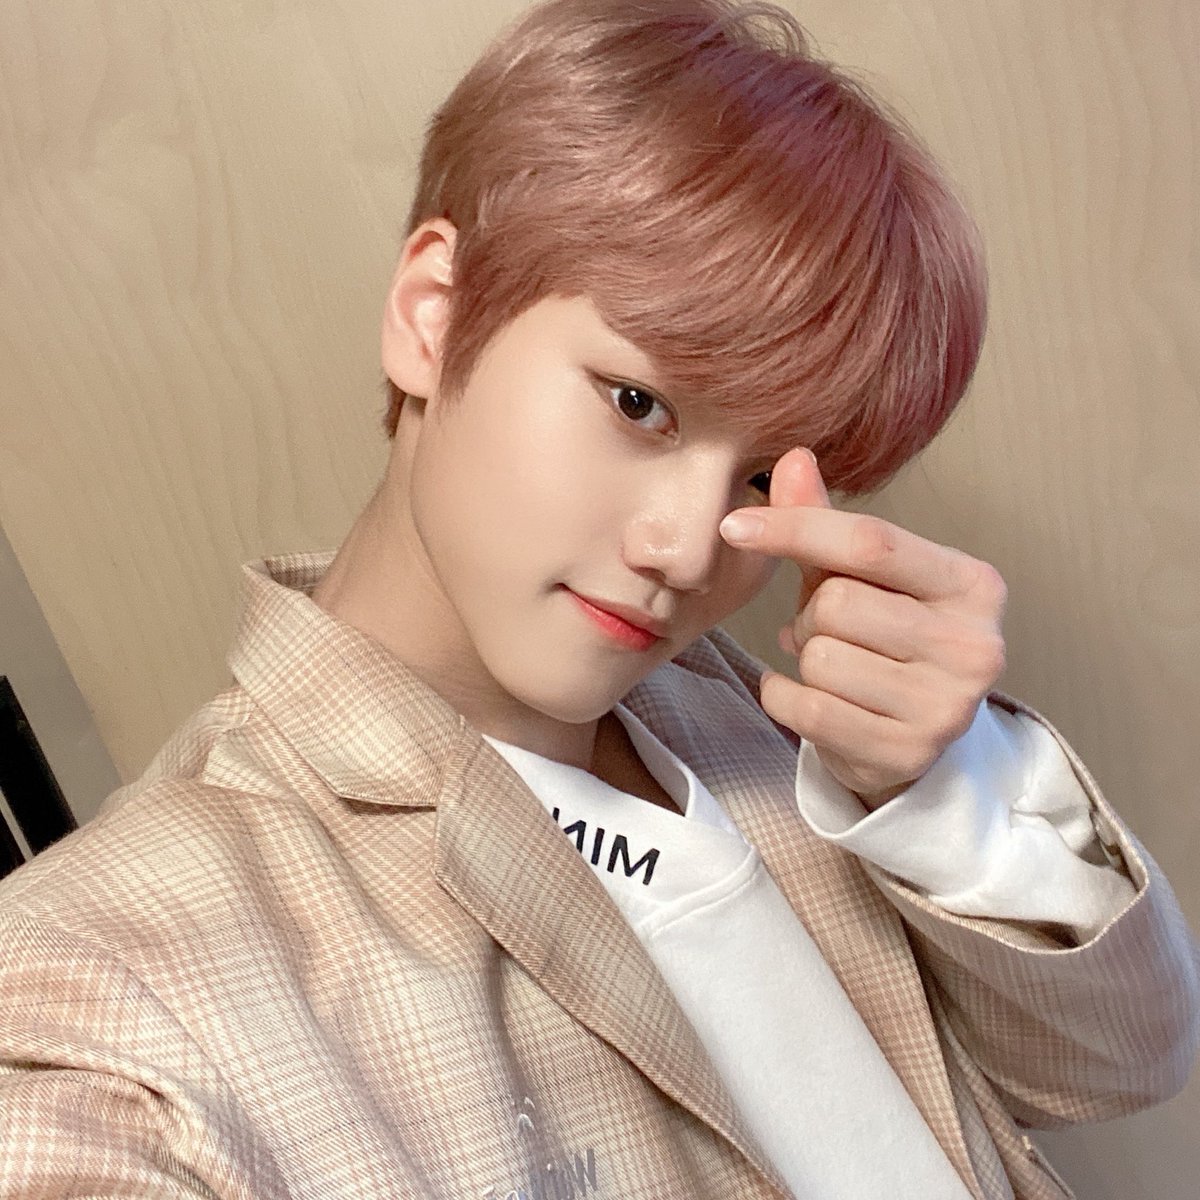 minjae ⇢ center of attention⇢ has many friends/popular⇢ has fangirls from different classes⇢ seems tough but is a softie⇢ teachers pet somehow⇢ everyones weak for his smile⇢ gets away w a lot of things bc of it⇢ has mastered the puppy dog eyes⇢ class flirt